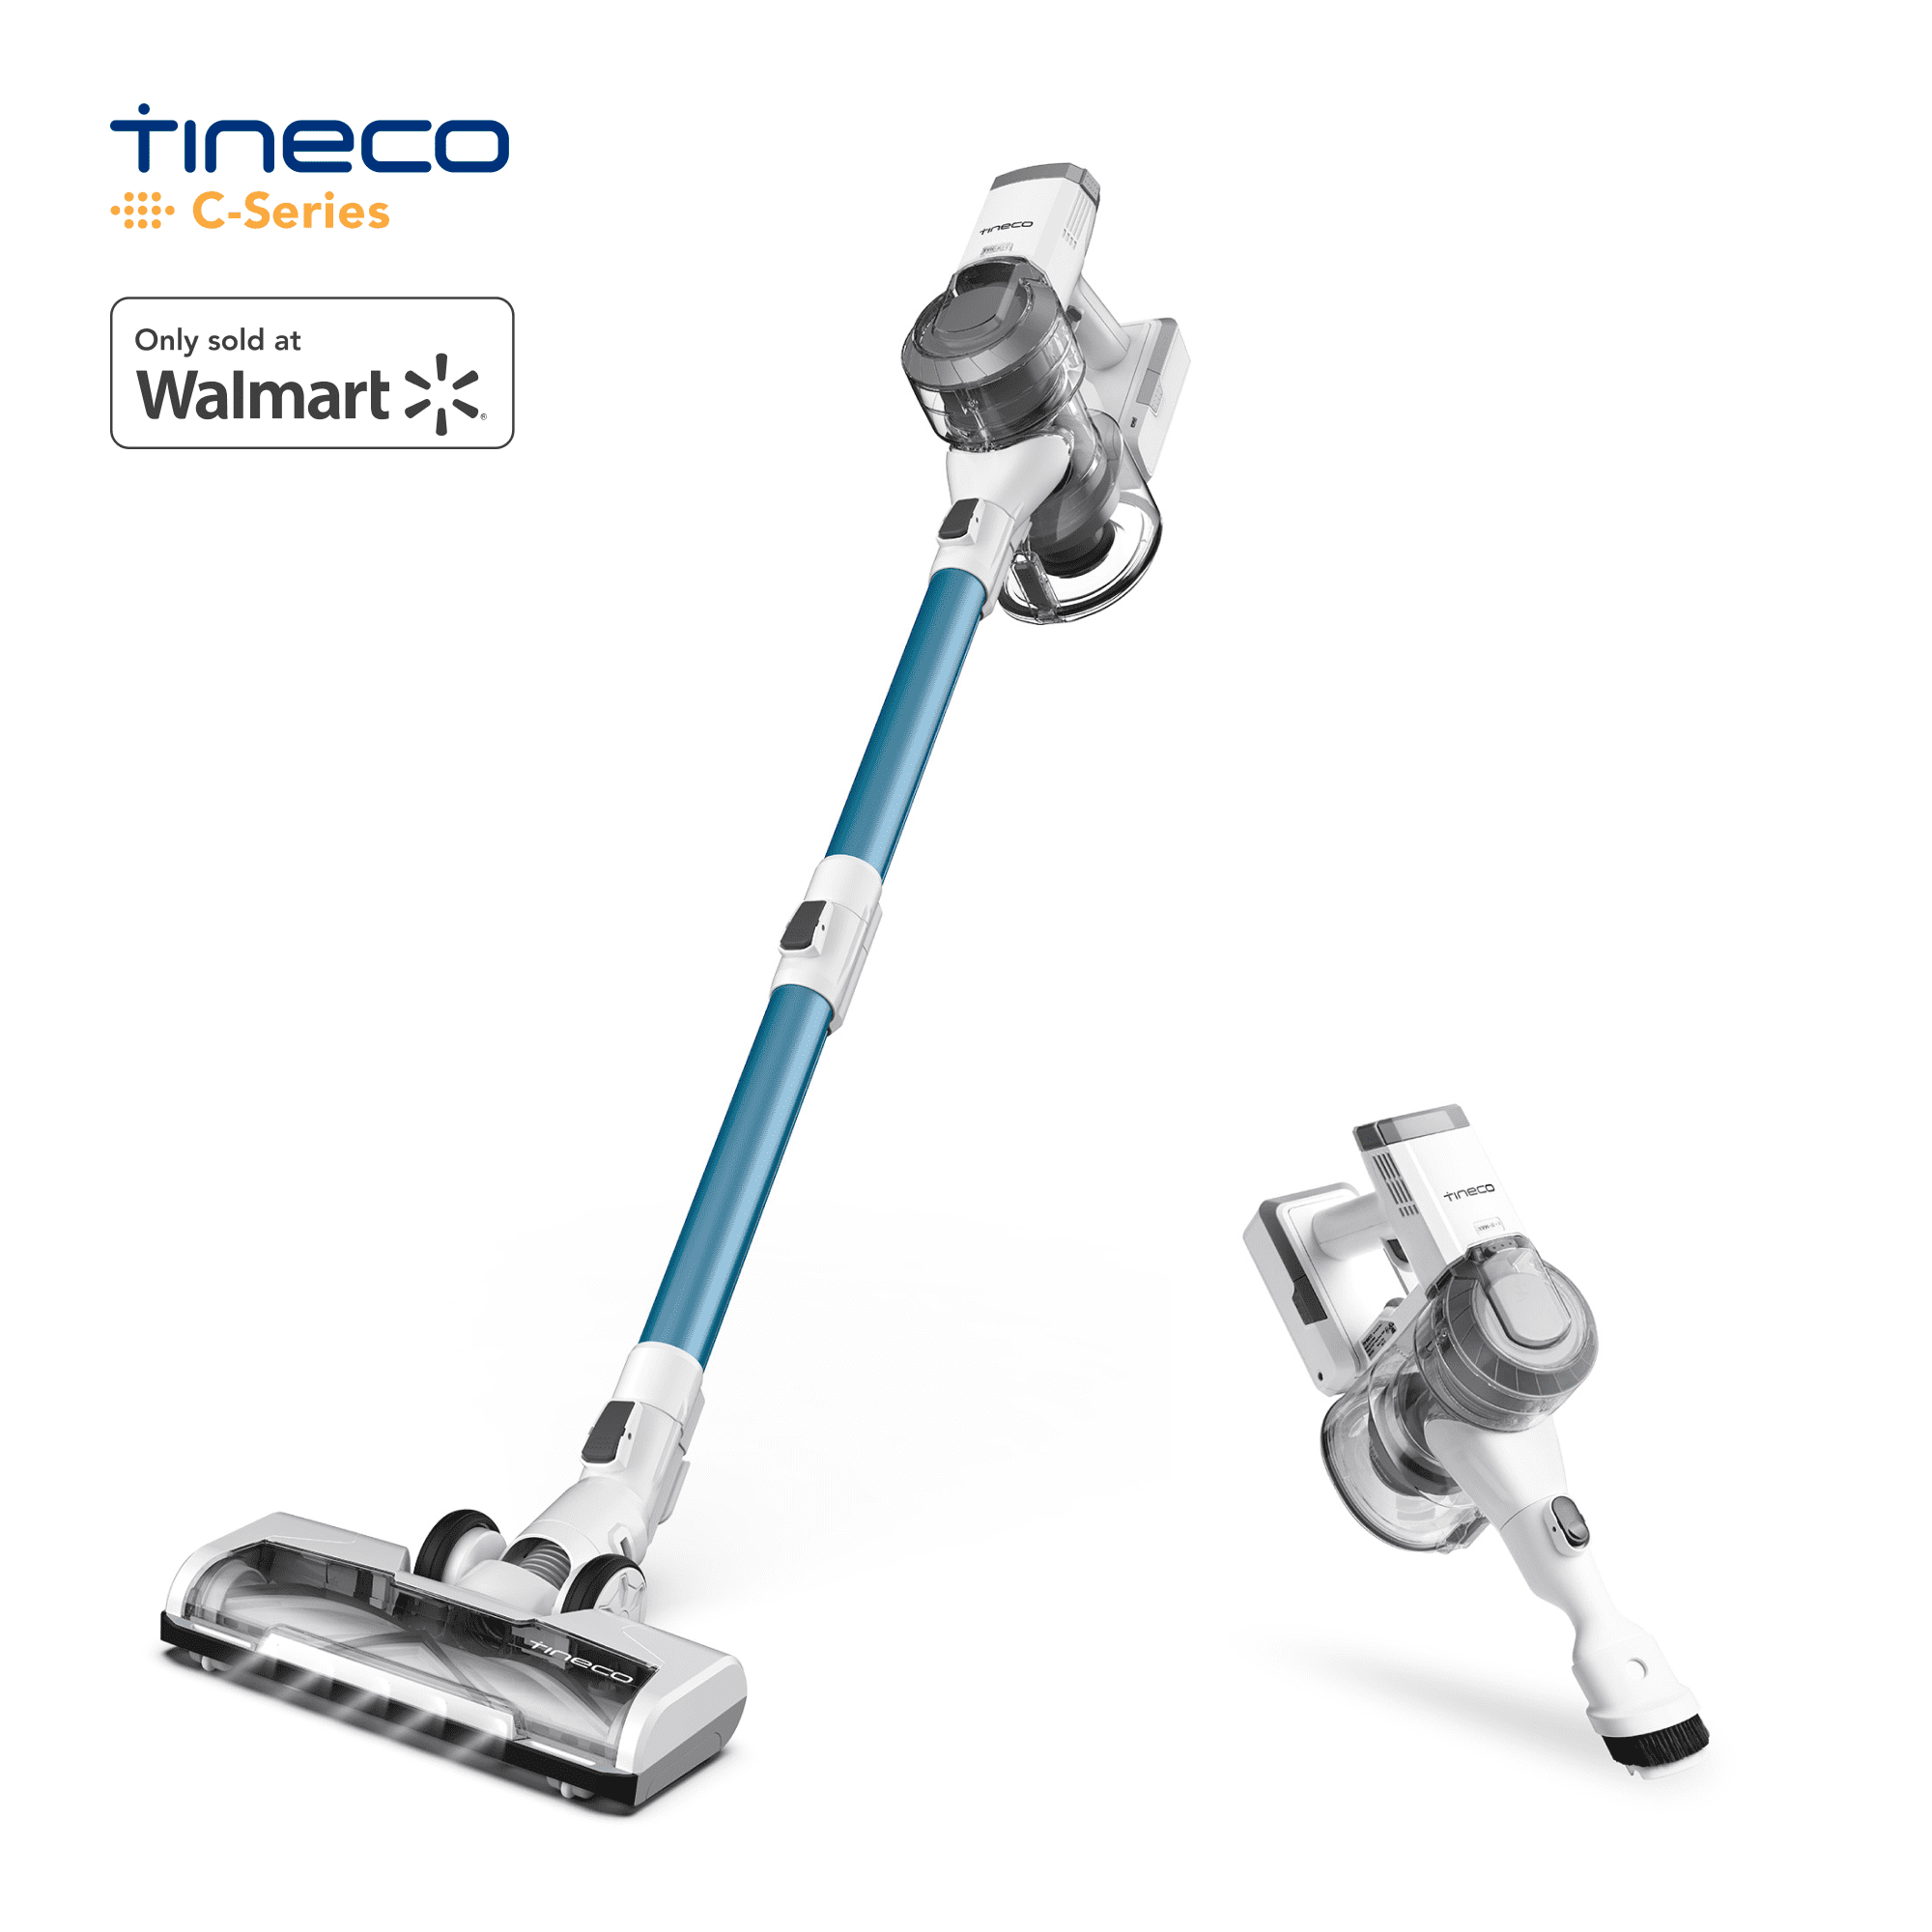 How To Clean Tineco Vacuum  